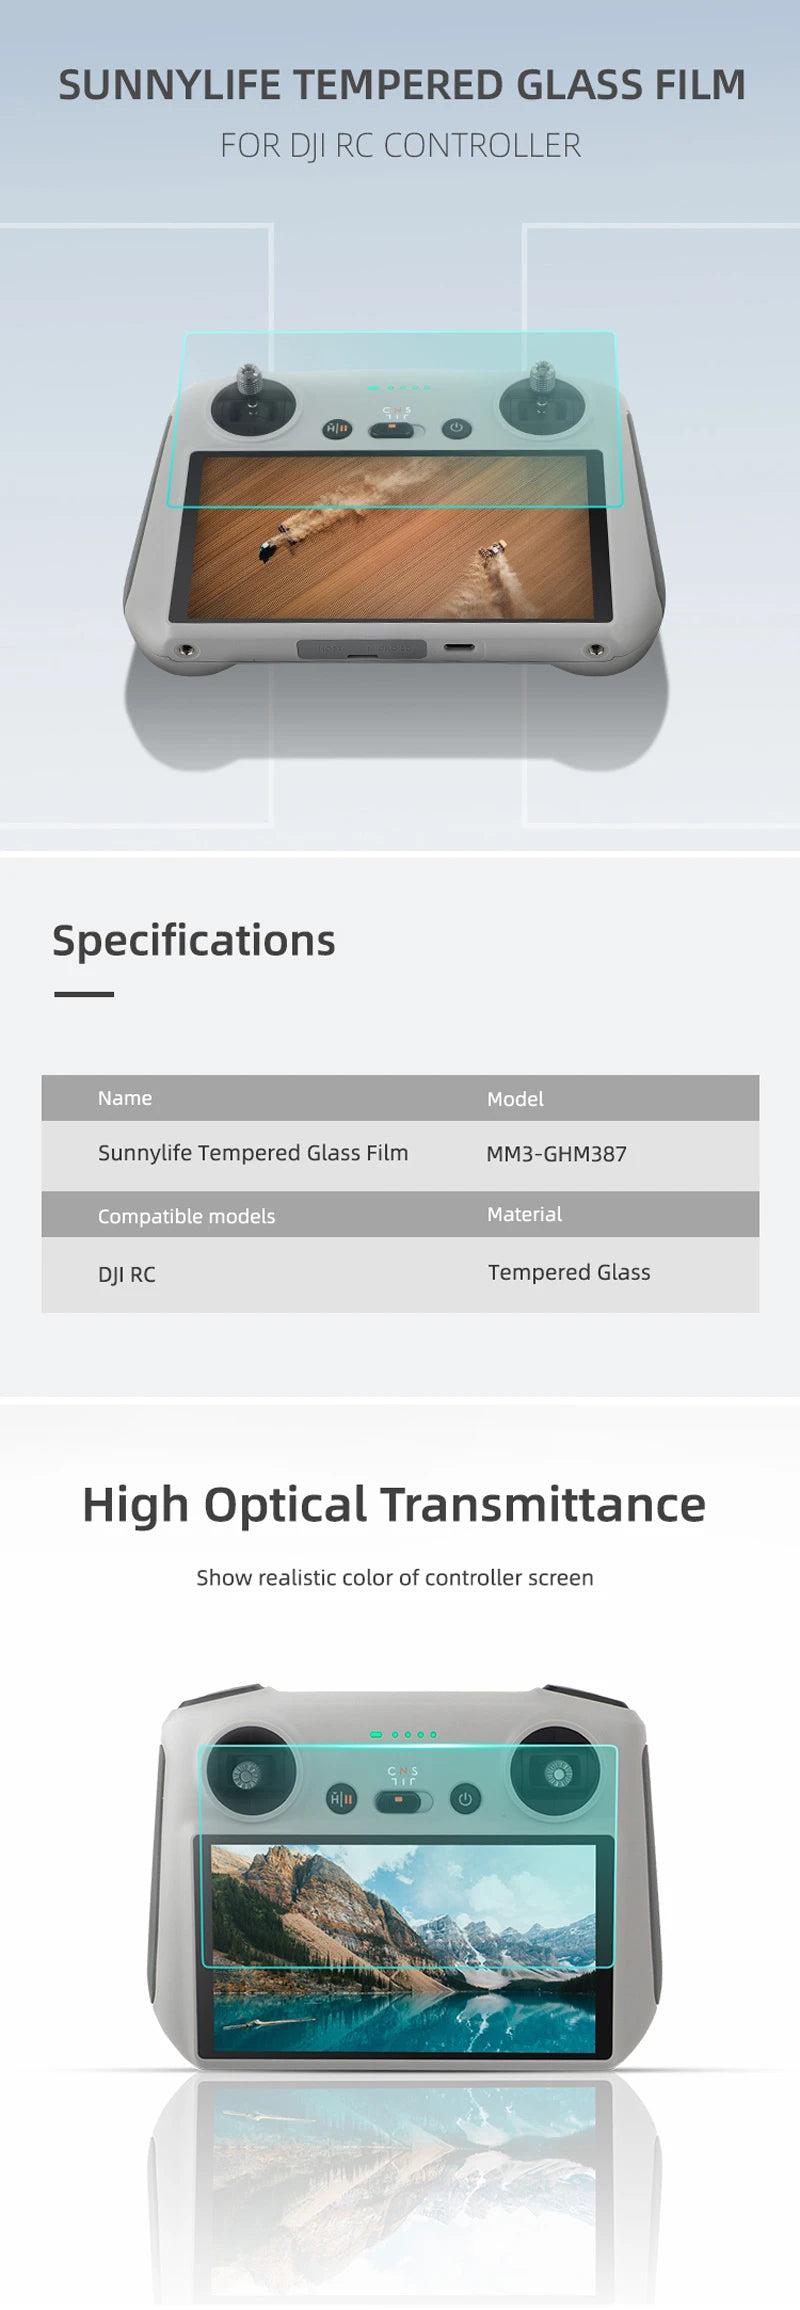 Sunnylife Tempered Glass Film MM3-GHM387 Compatible models Material DJI